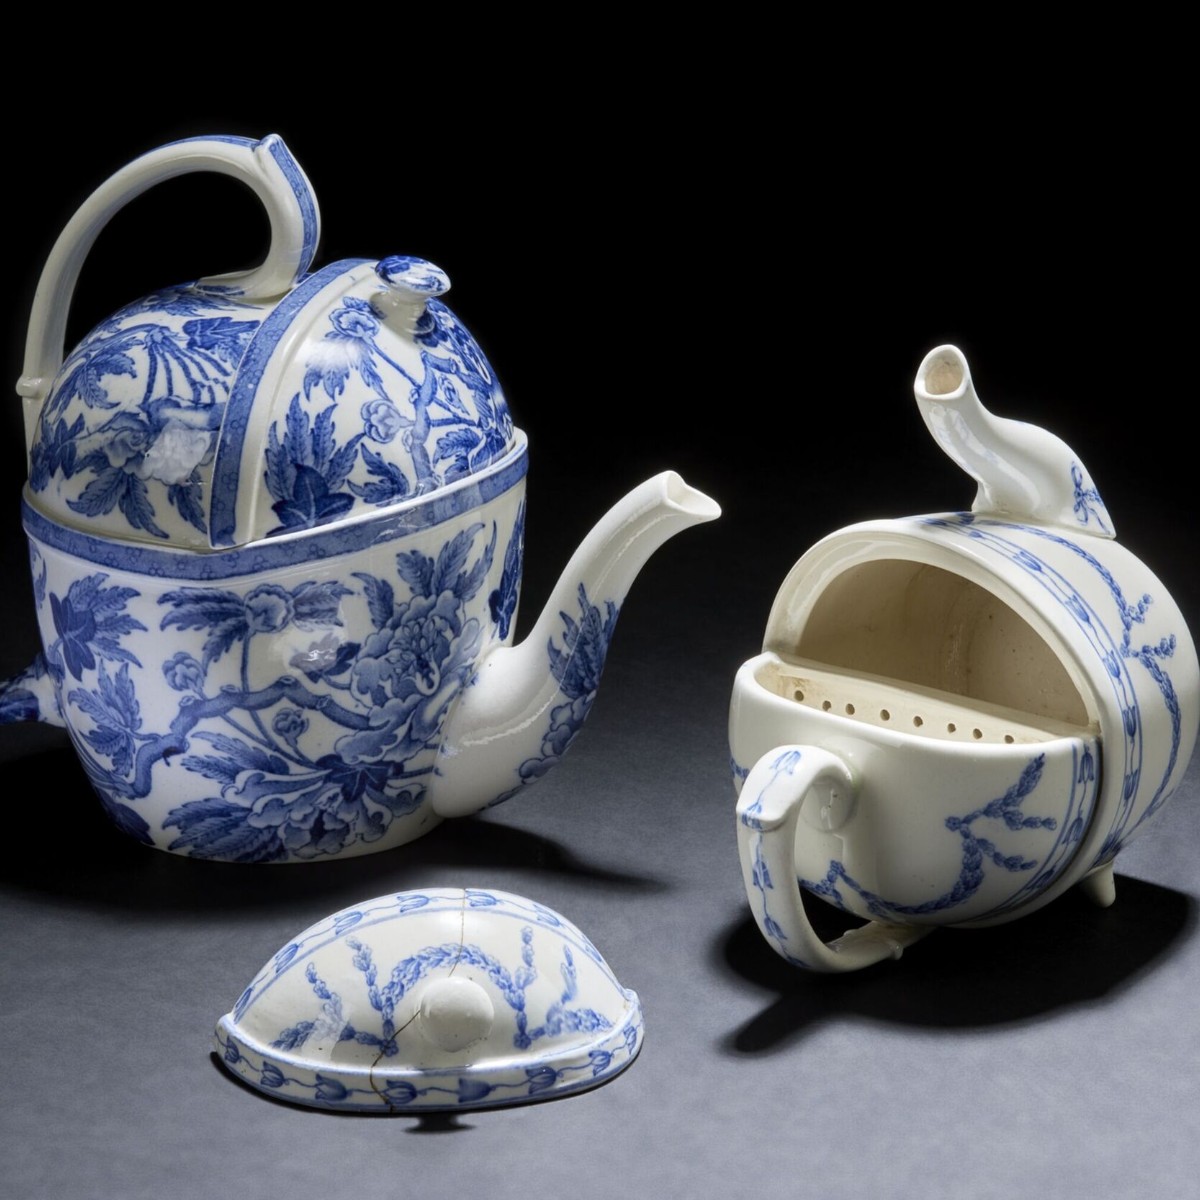 For #TeapotTuesday, here's a Simple Yet Perfect teapot. Developed by Sir Douglas Baillie Hamilton Cochrane, the 12th Earl of Dundonald, the design separated the used tea leaves from the prepared tea. This example features the 'Peony' pattern and was manufactured in 1906.